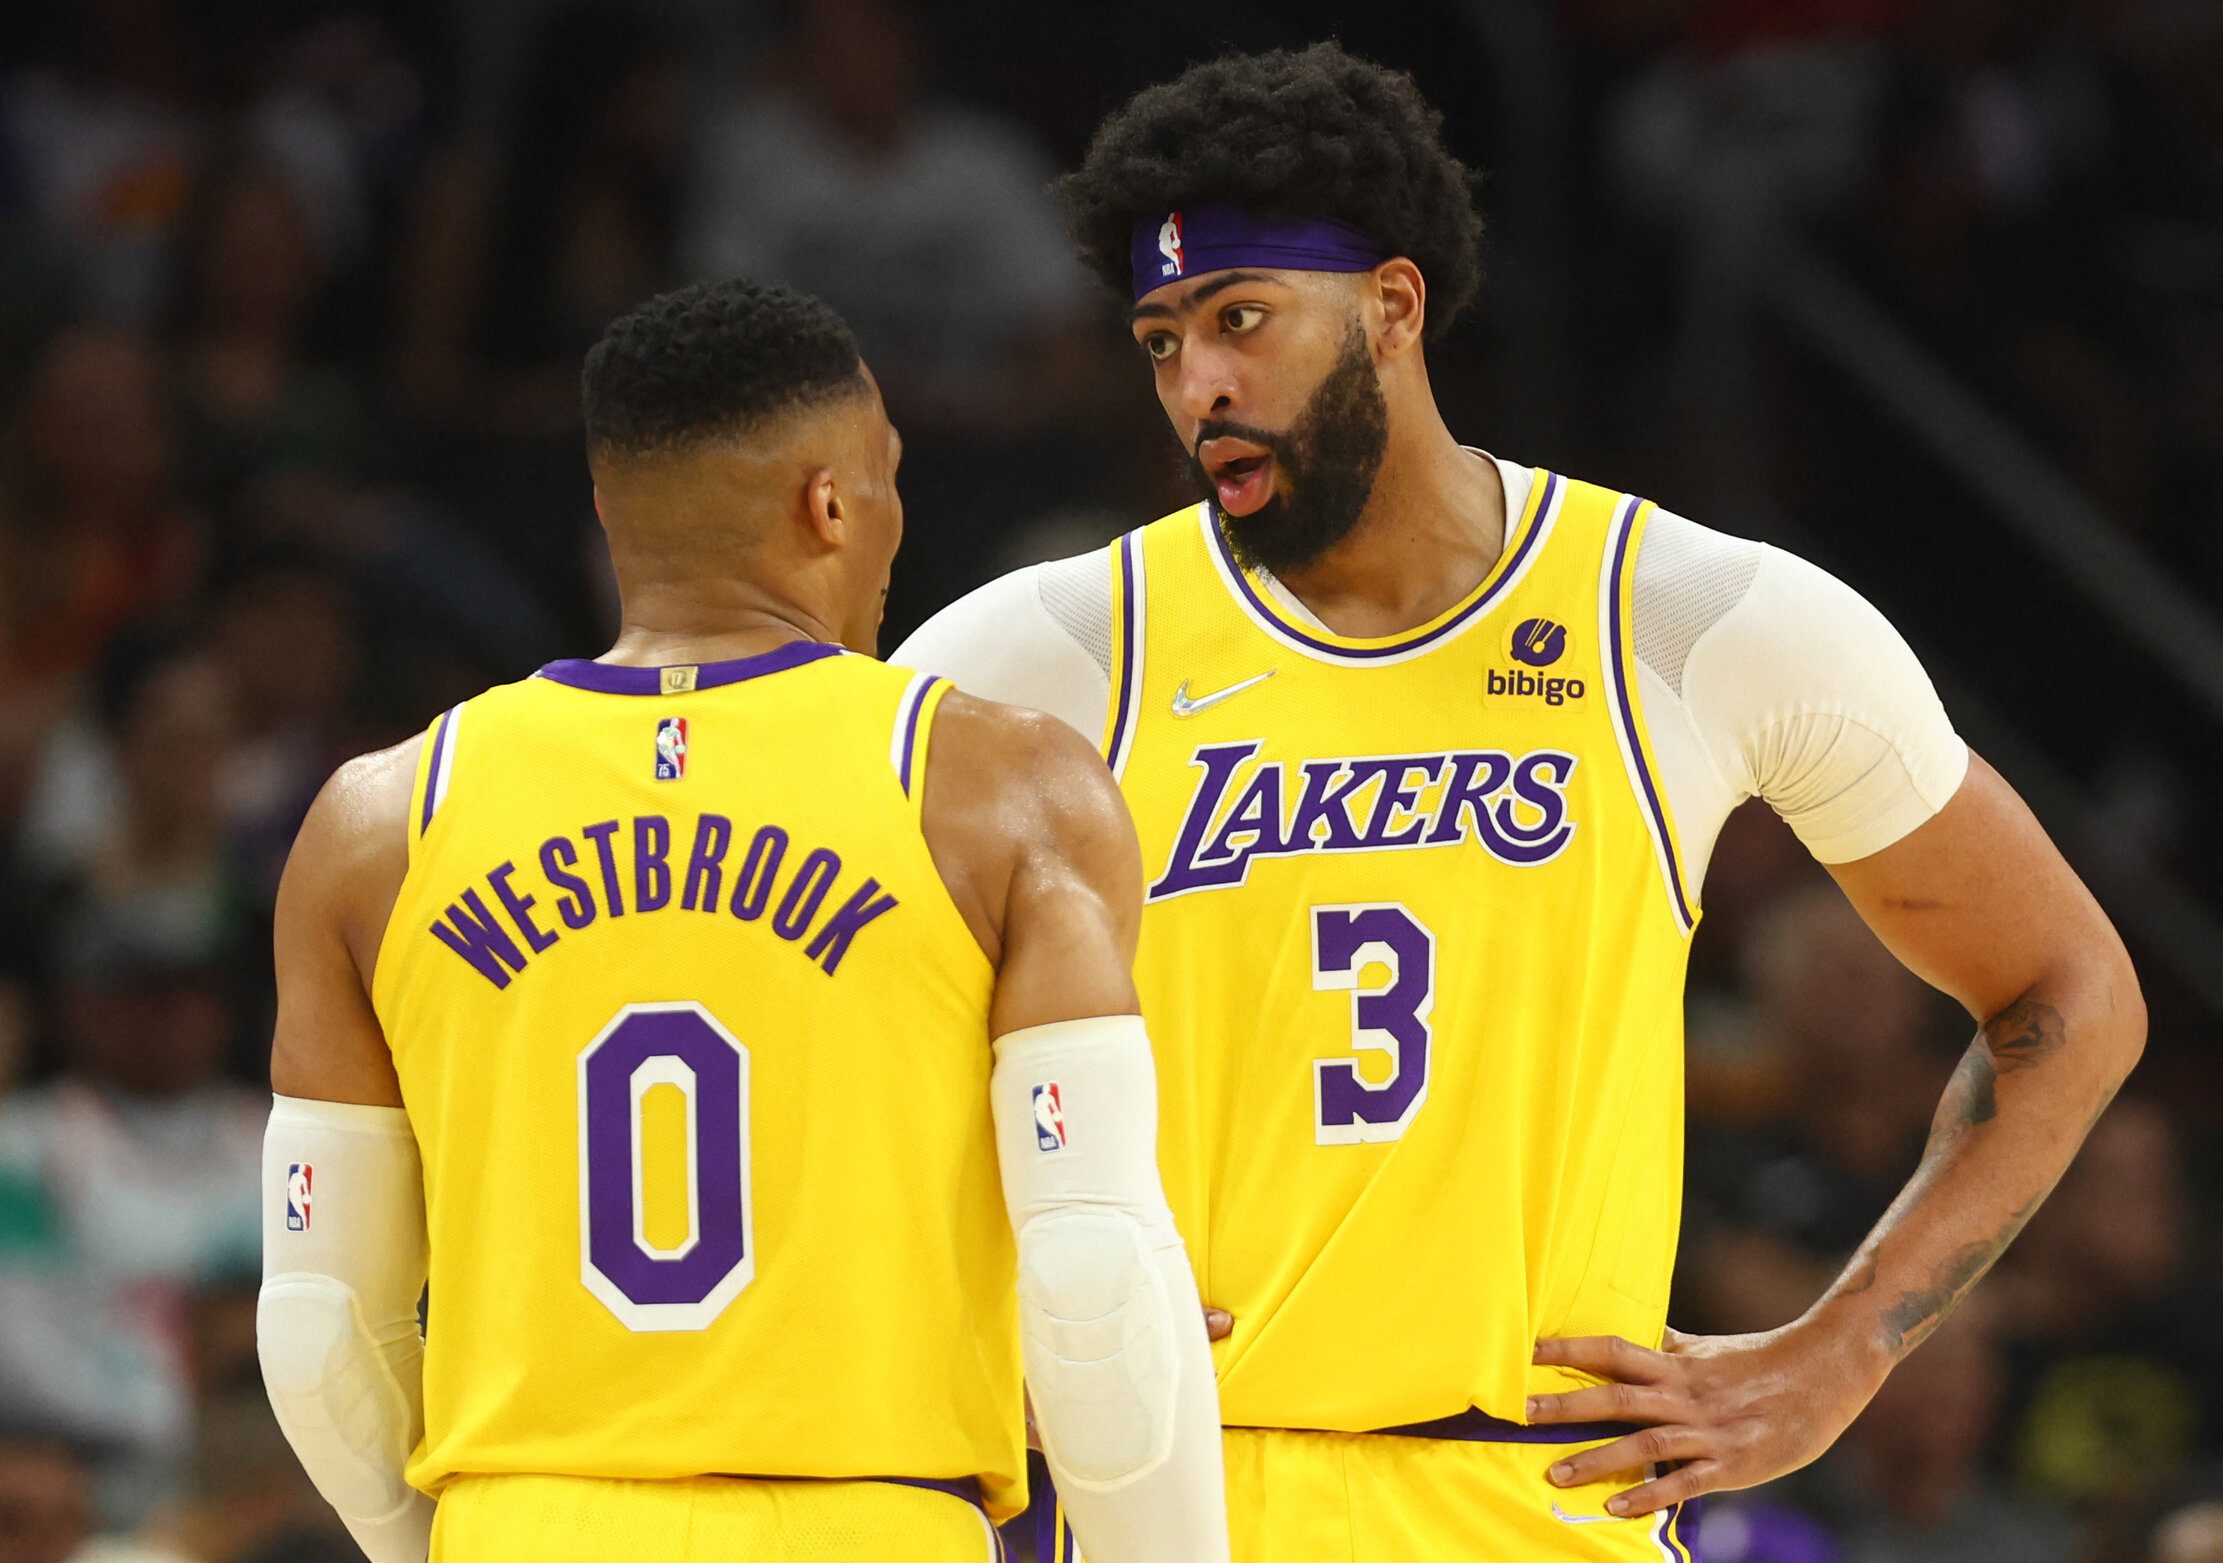 Soul searching ahead for Lakers after missing playoffs